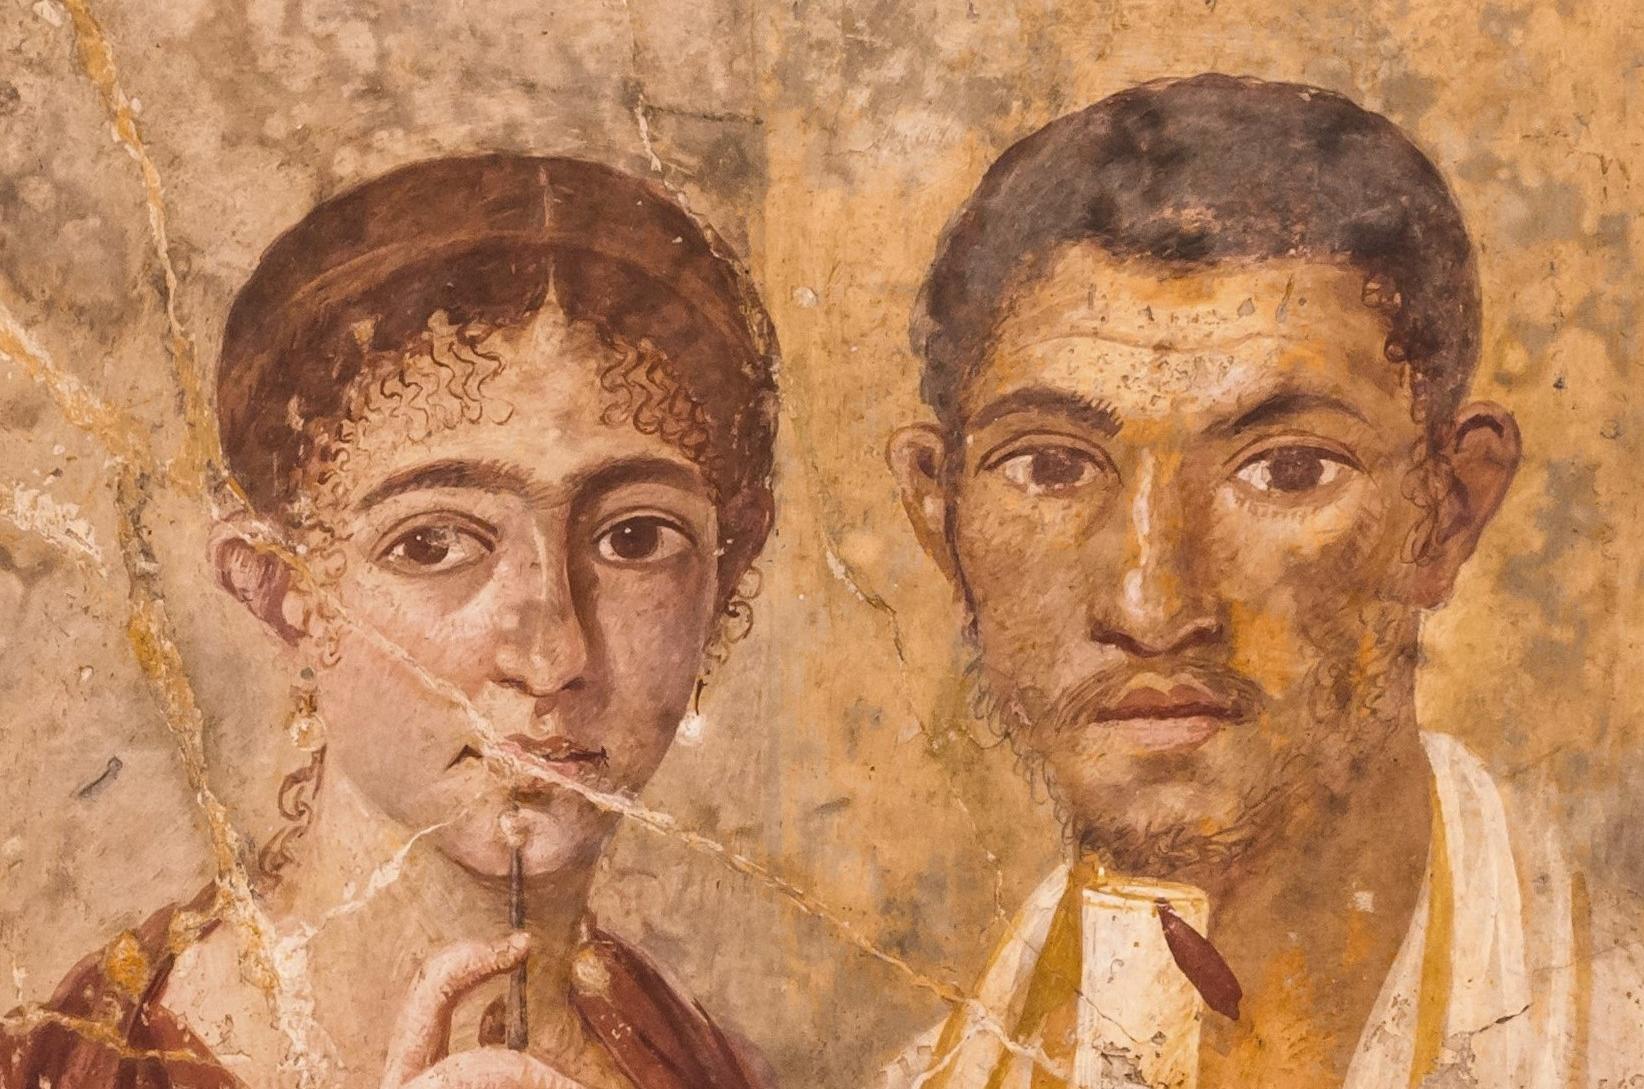 Roman fresco from Pompei depicting a man holding a scroll and a woman holding a stylus and wax tablet.